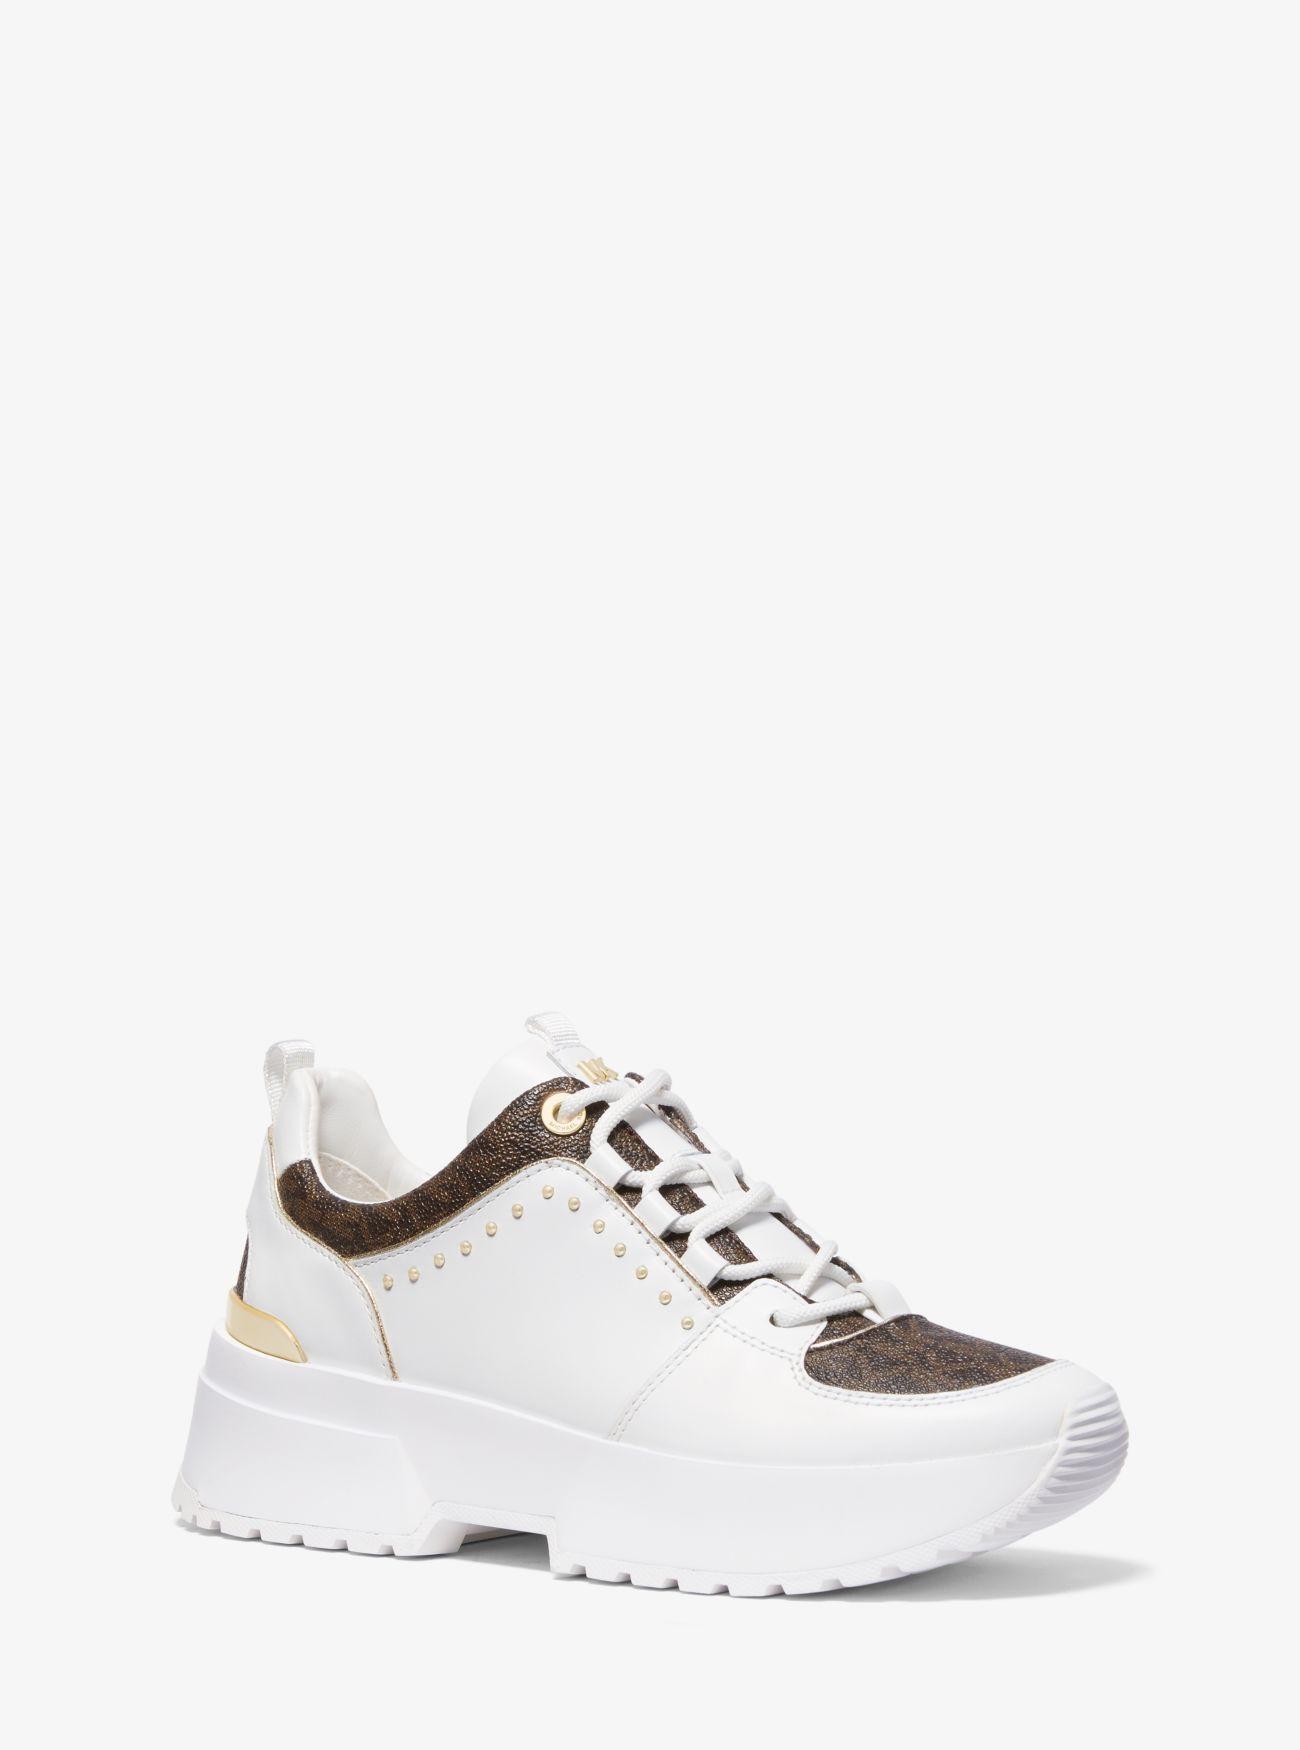 Michael Kors Leather Cosmo Trainer Optic White/brown | Lyst Canada